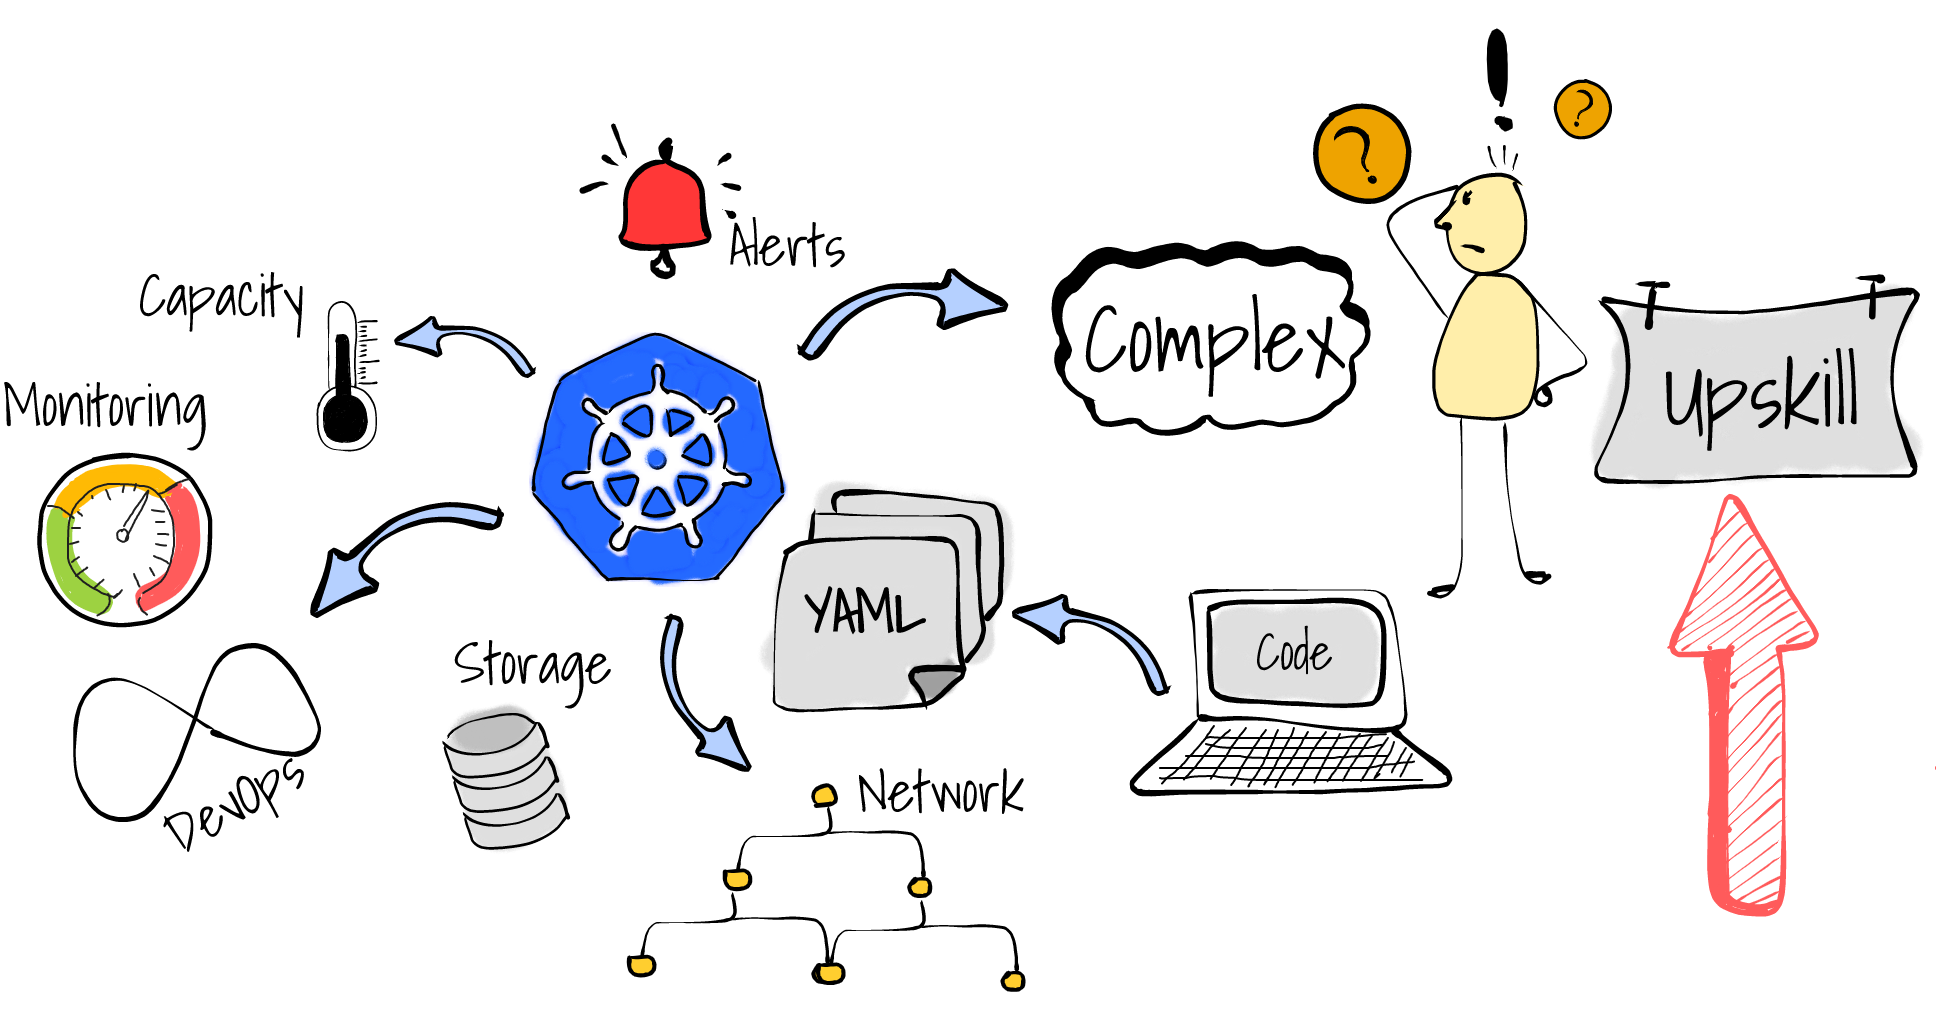 Kubernetes is complex to manage